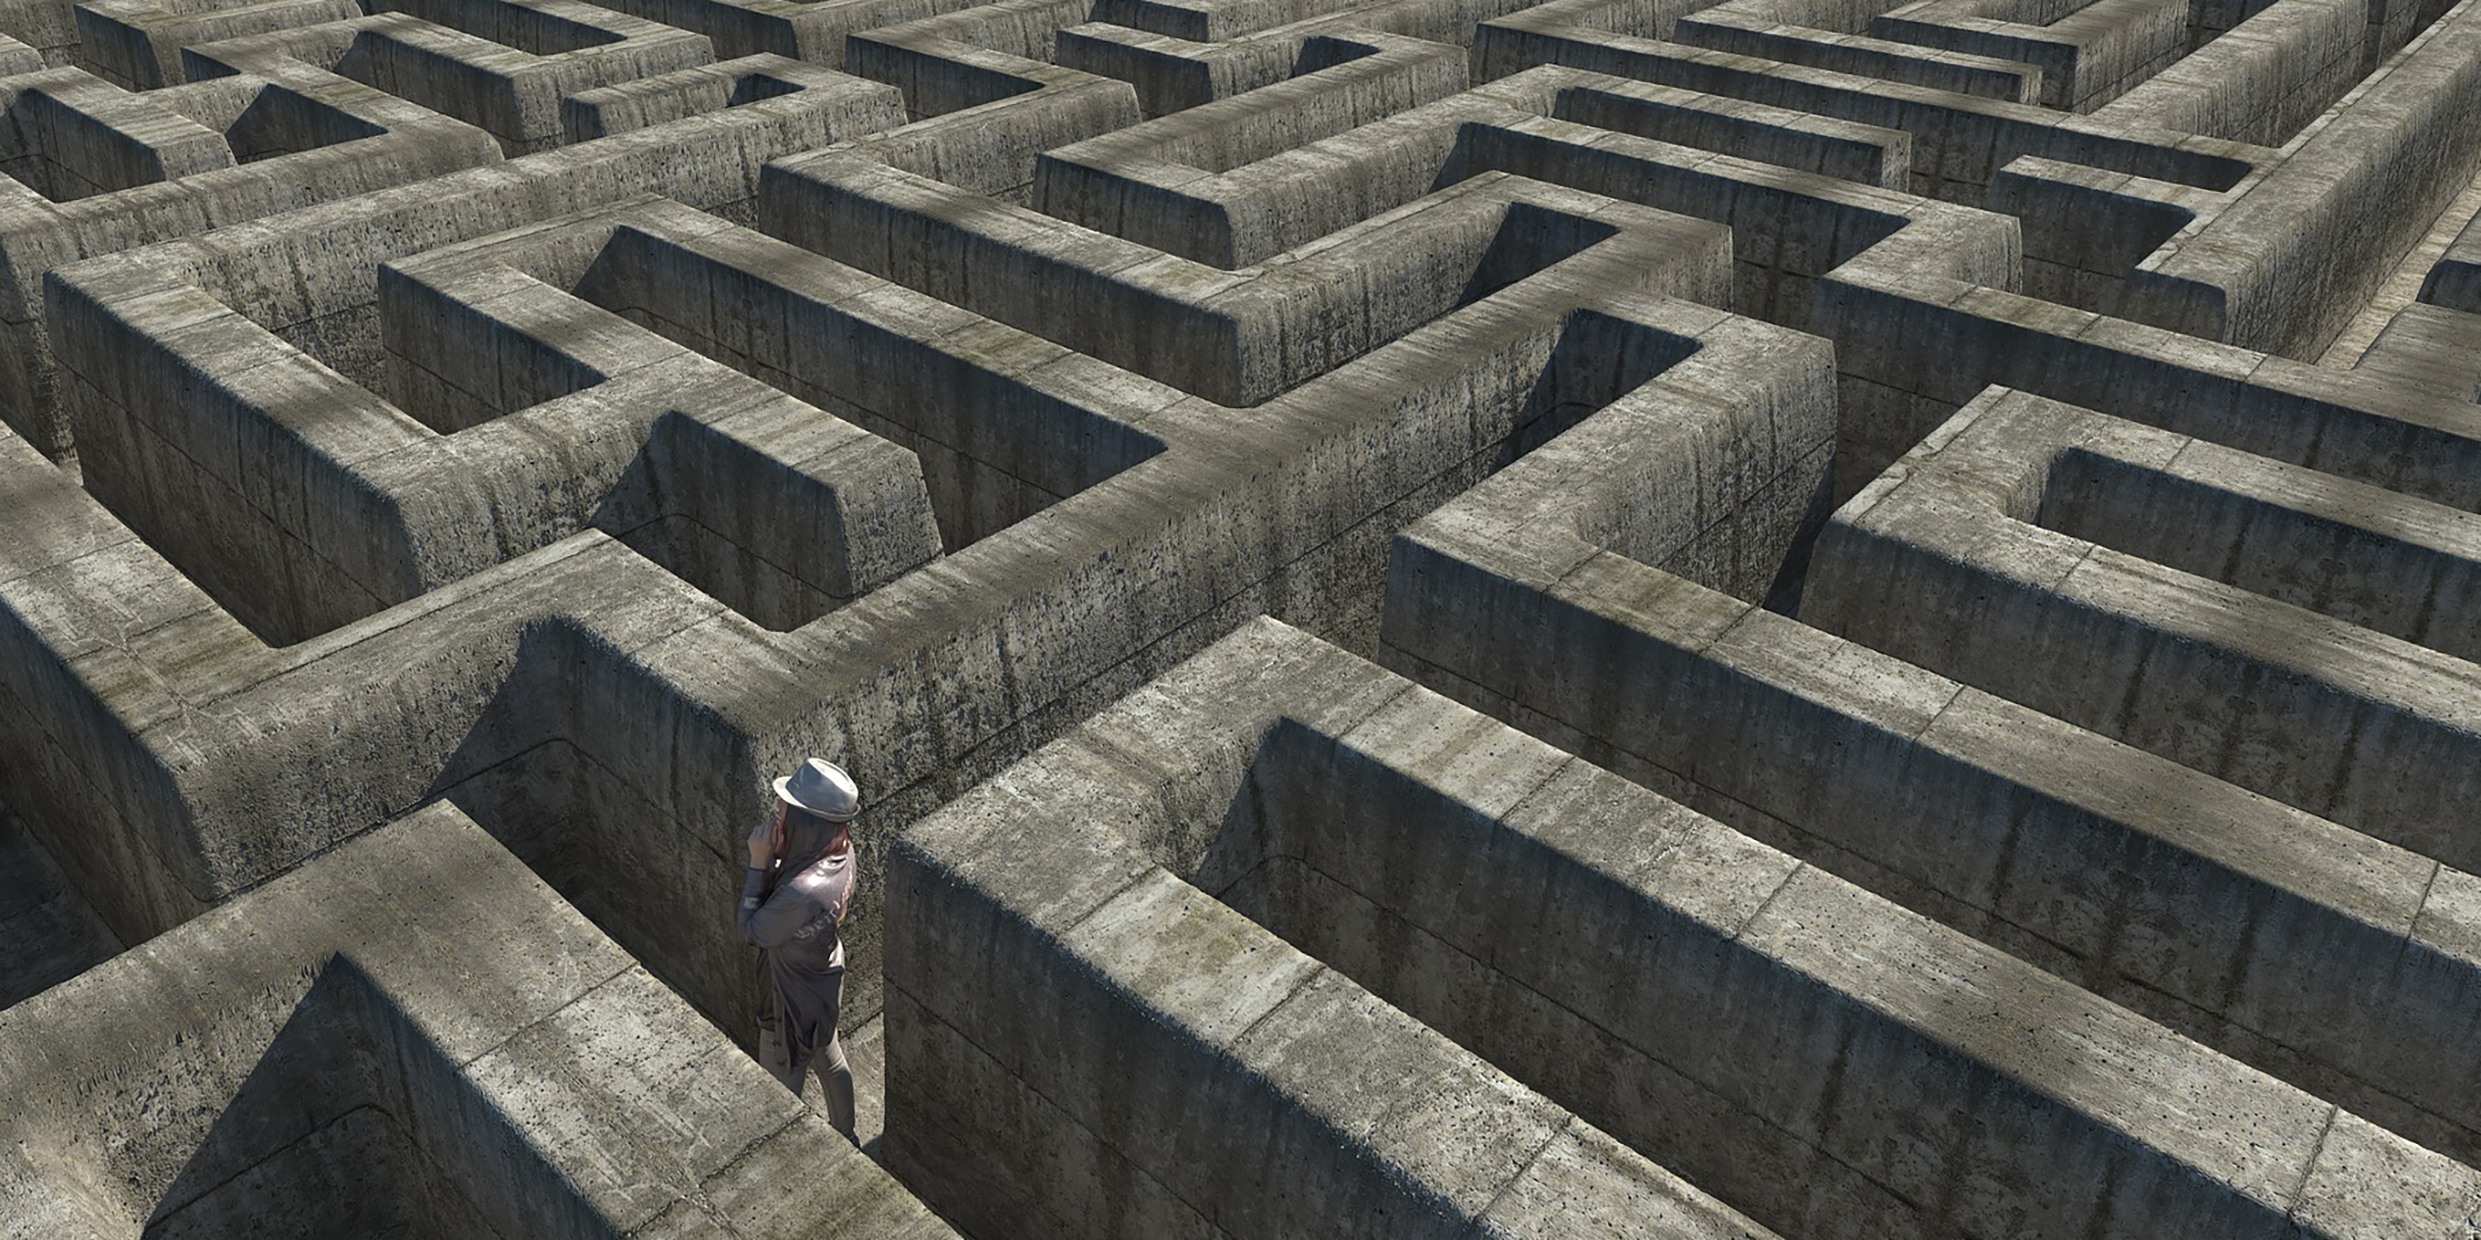 Image of person trying to navigate a labyrinth